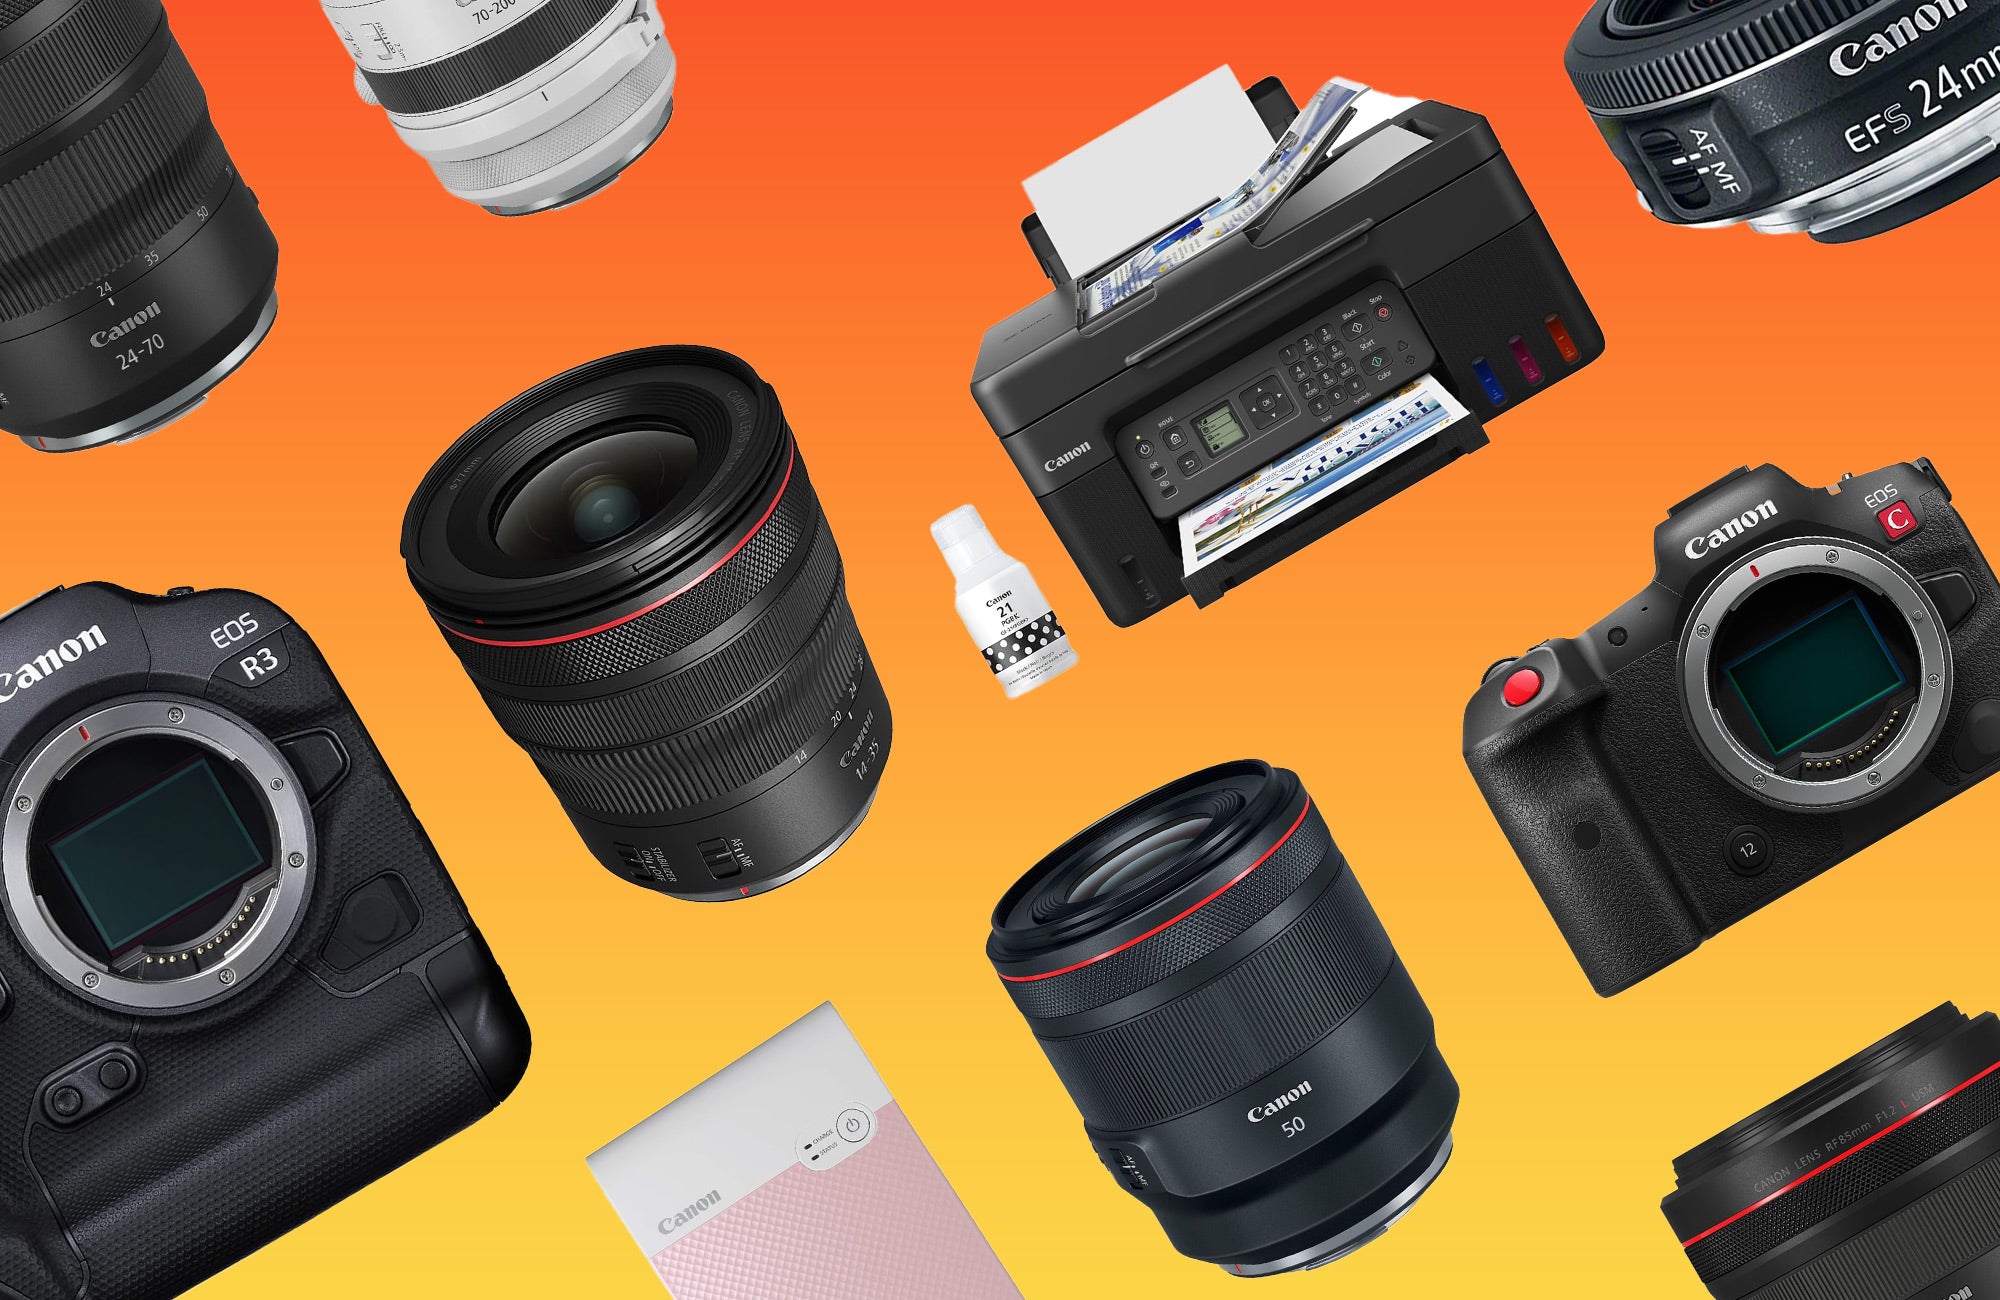 Save up to $500 on Canon cameras, lenses, and printers at Amazon